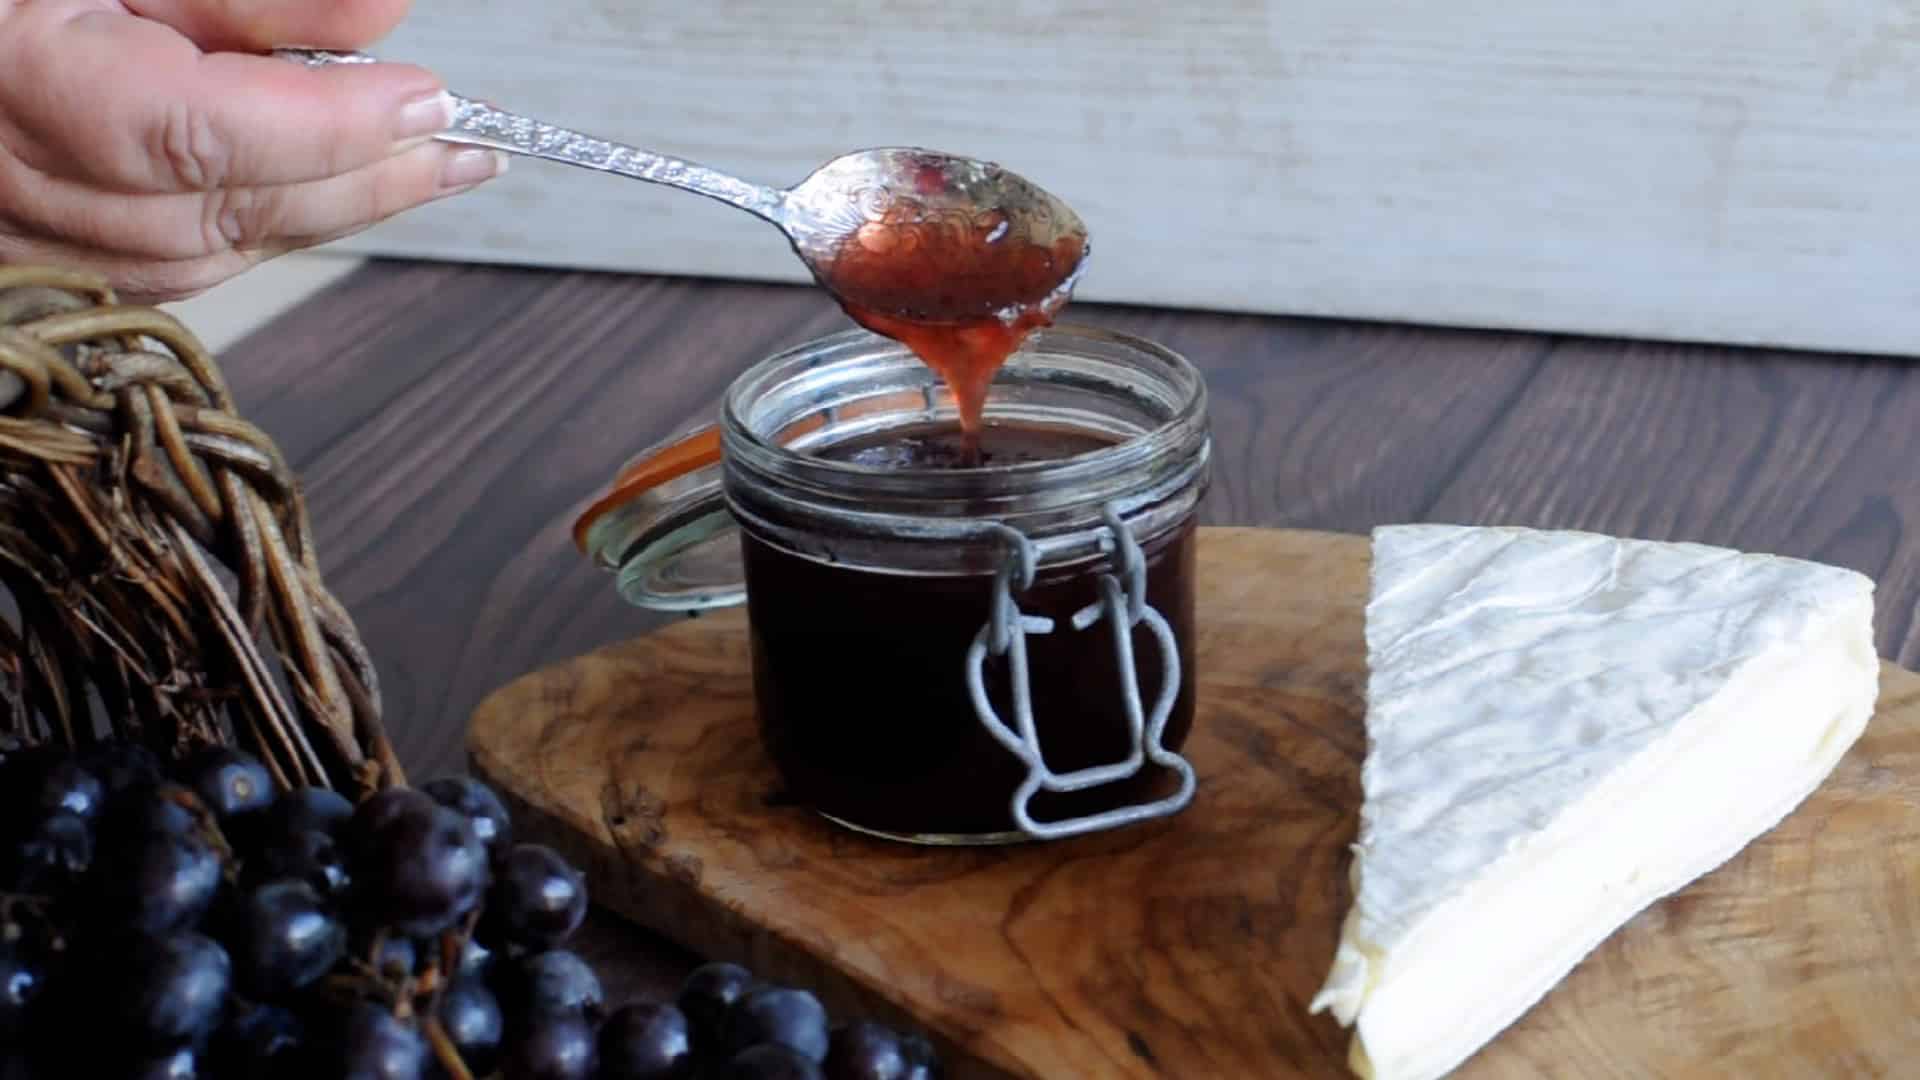 consistency of the grape jam dropping from a spoon